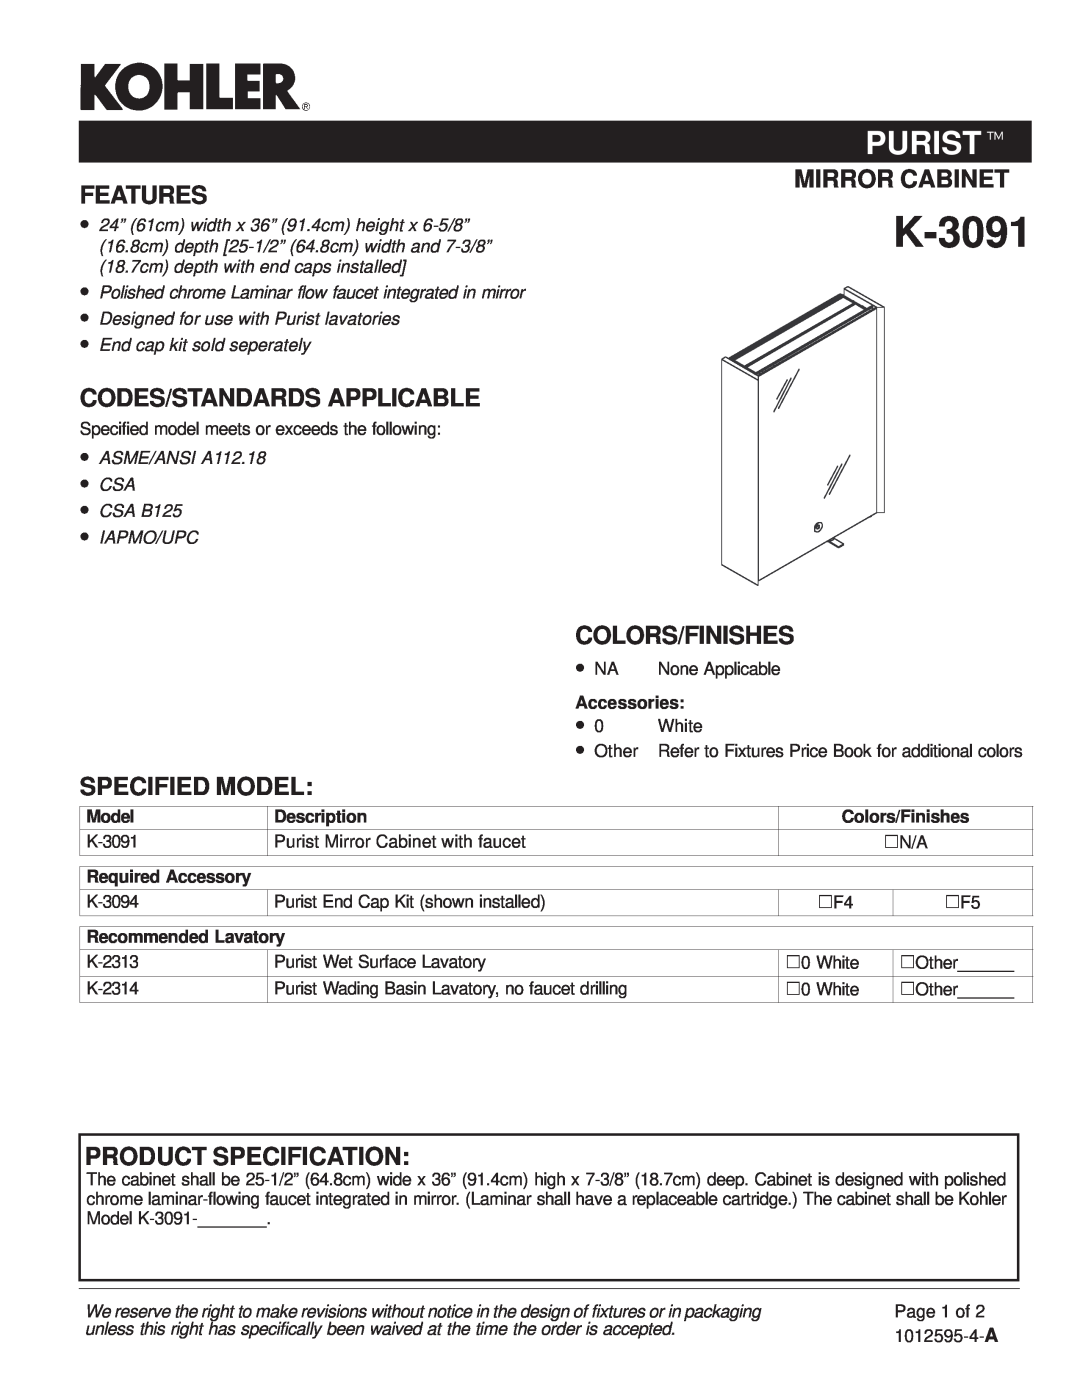 Kohler K-3091 manual Purist, Features, Codes/Standards Applicable, Mirror Cabinet, Colors/Finishes, Specified Model, Na 